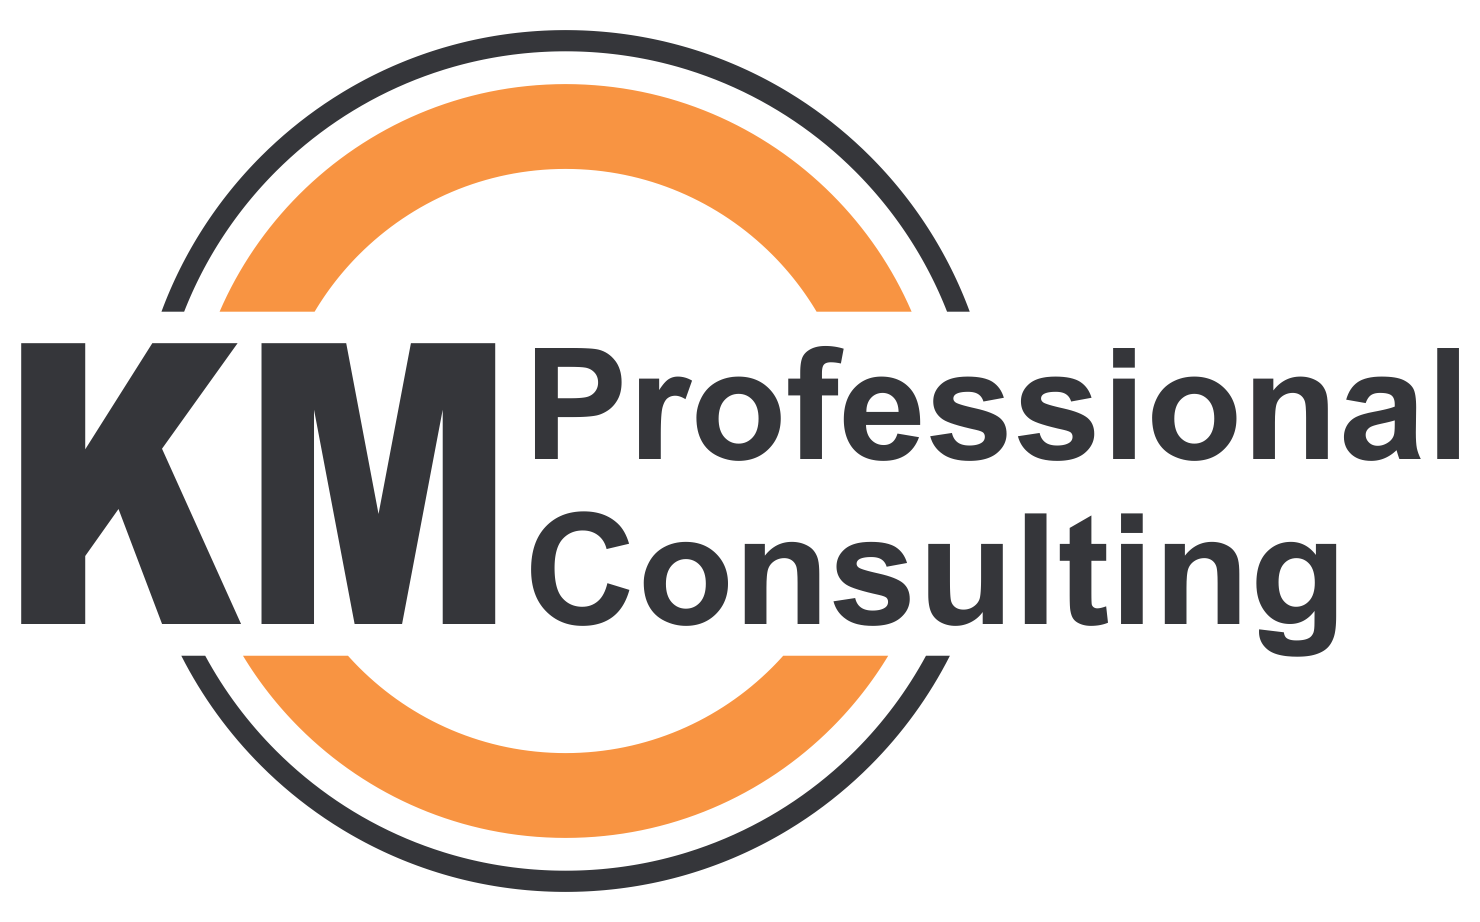 KM Professional Consulting